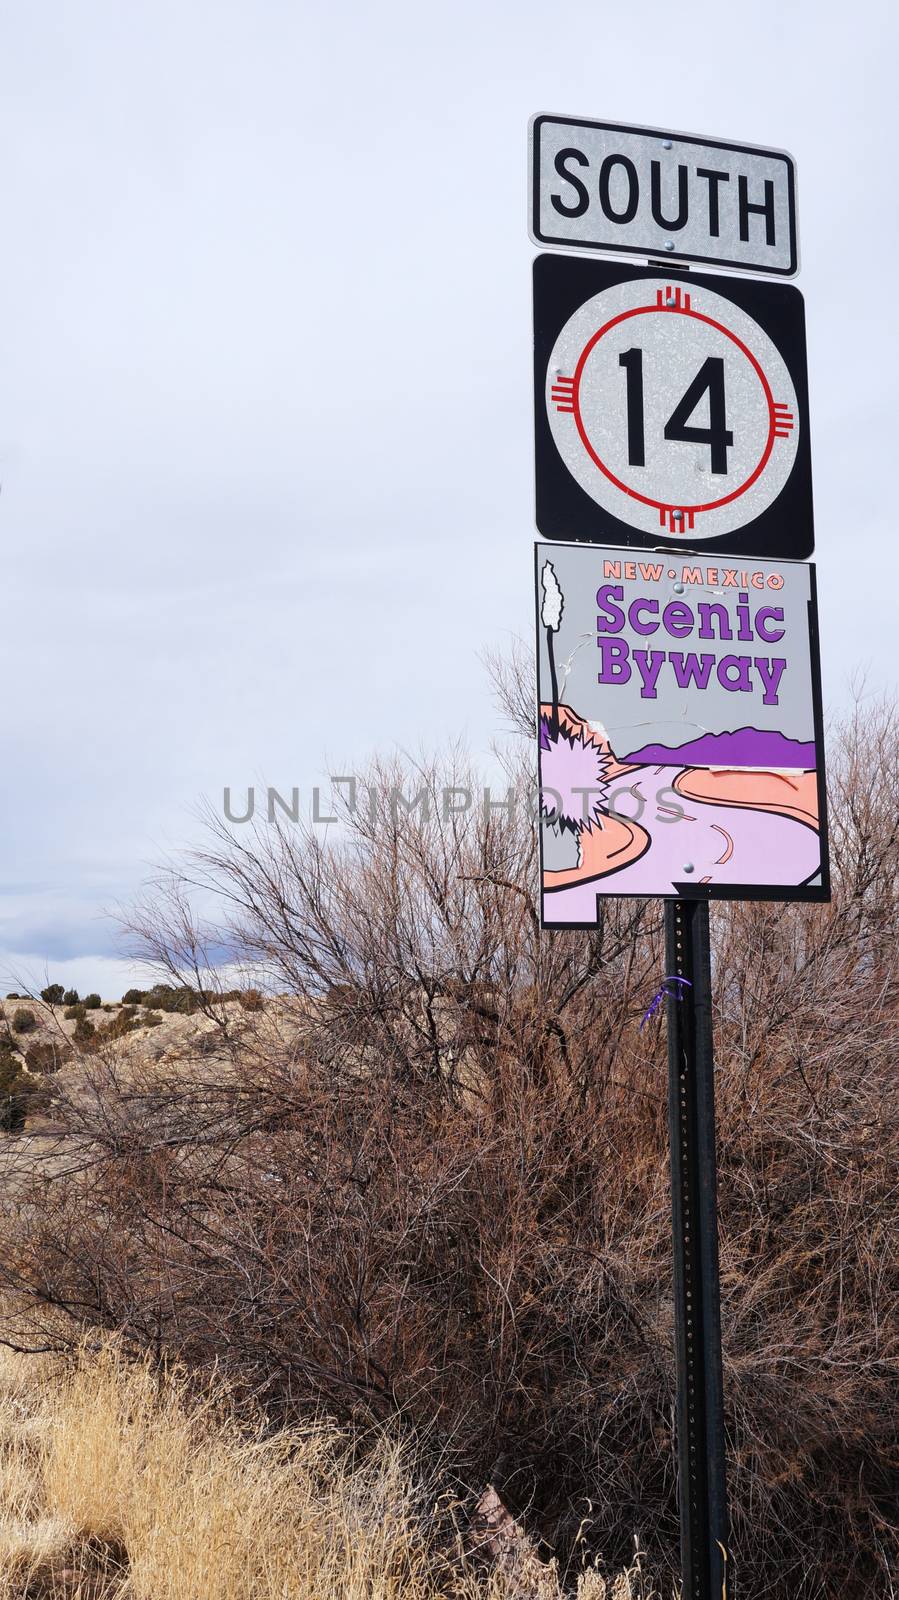 Scenic byway sign in New Mexico by tang90246